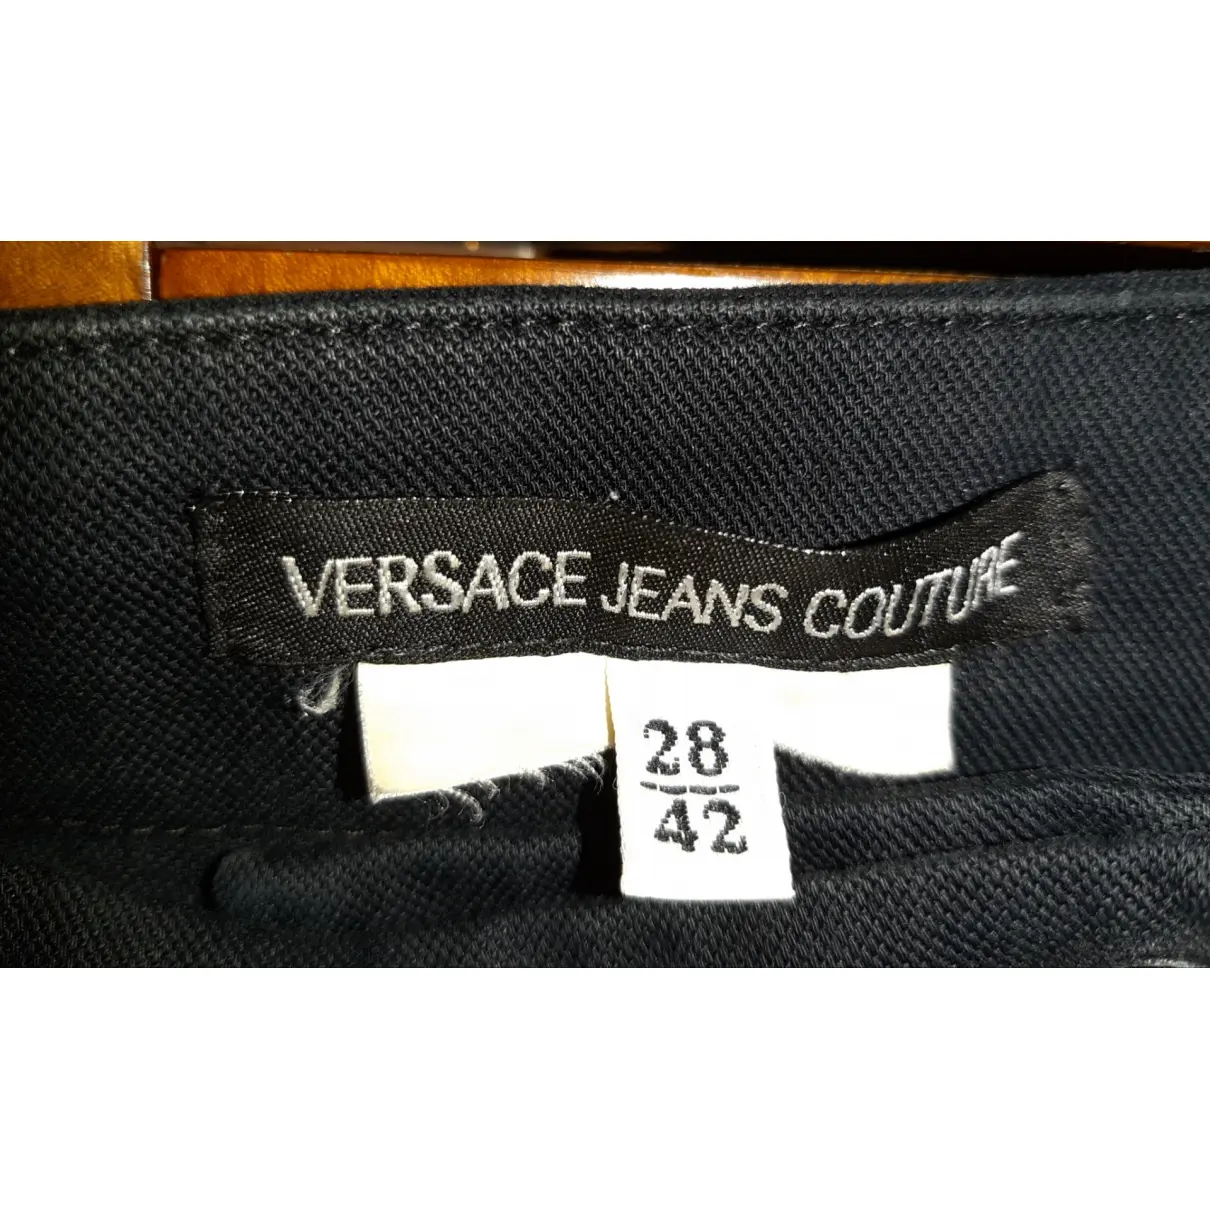 Straight pants Versace Jeans Couture